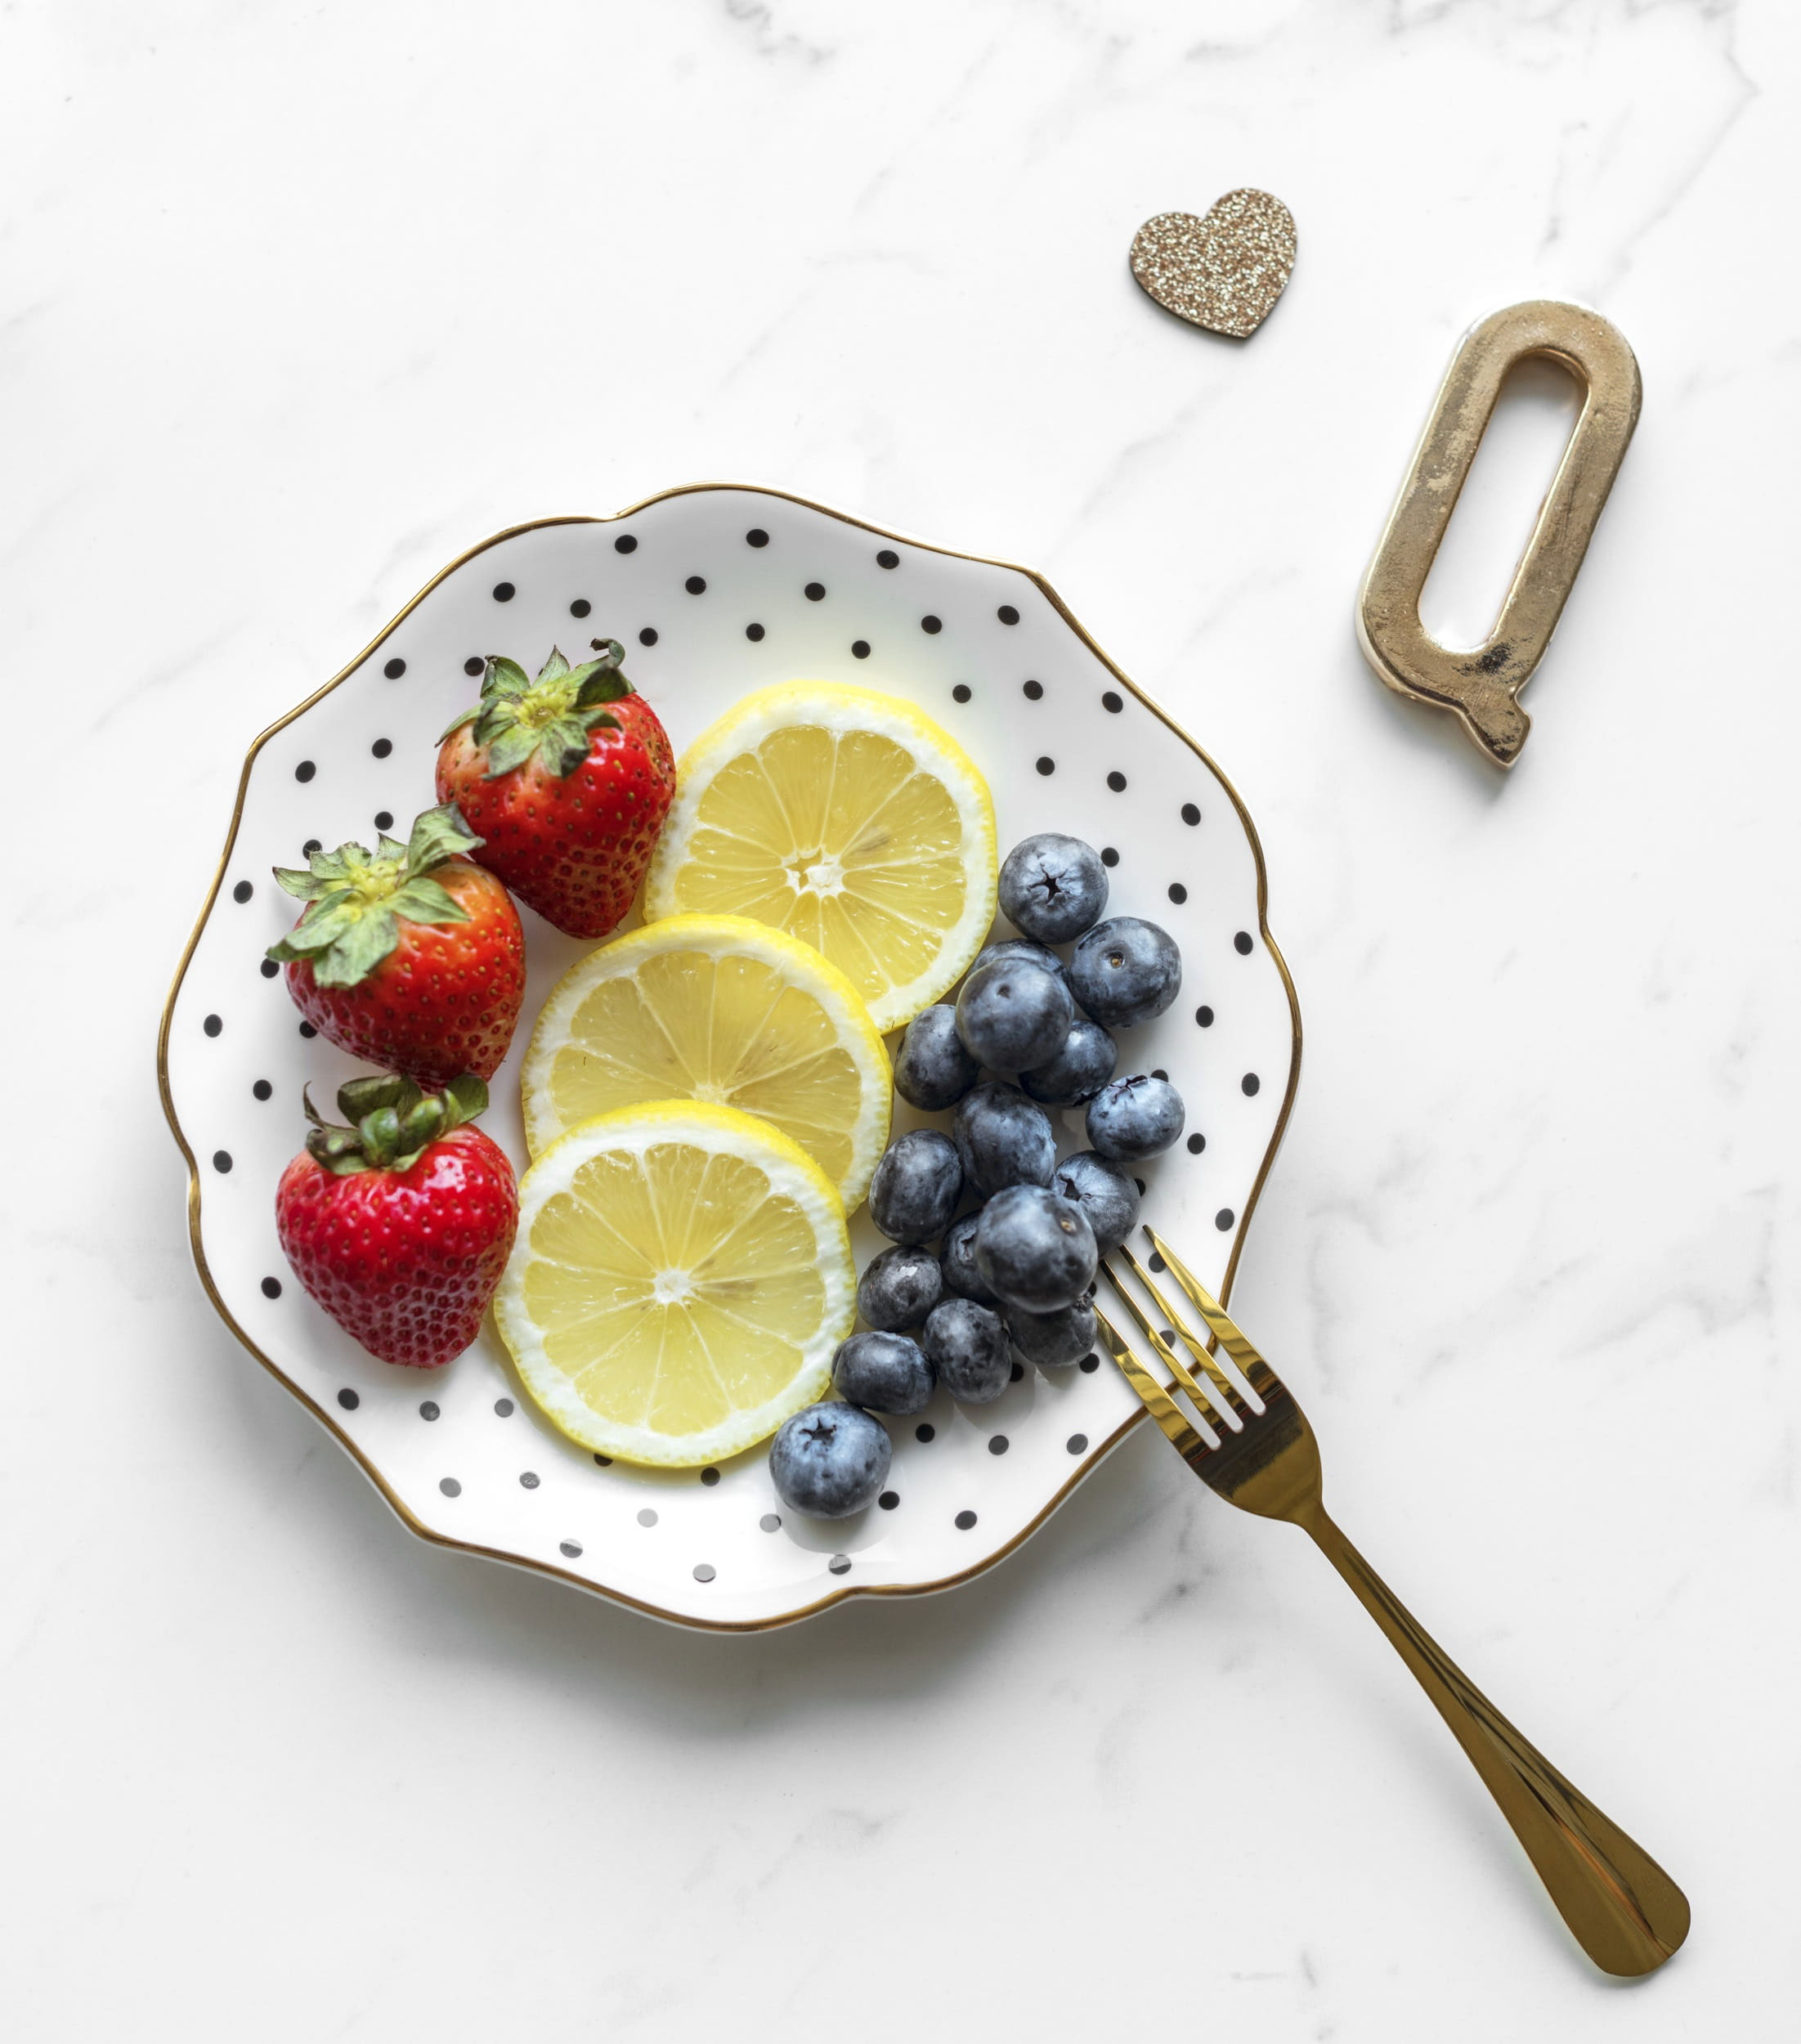 Blueberries wallpaper, strawberries, and lime slices on plate, fruit